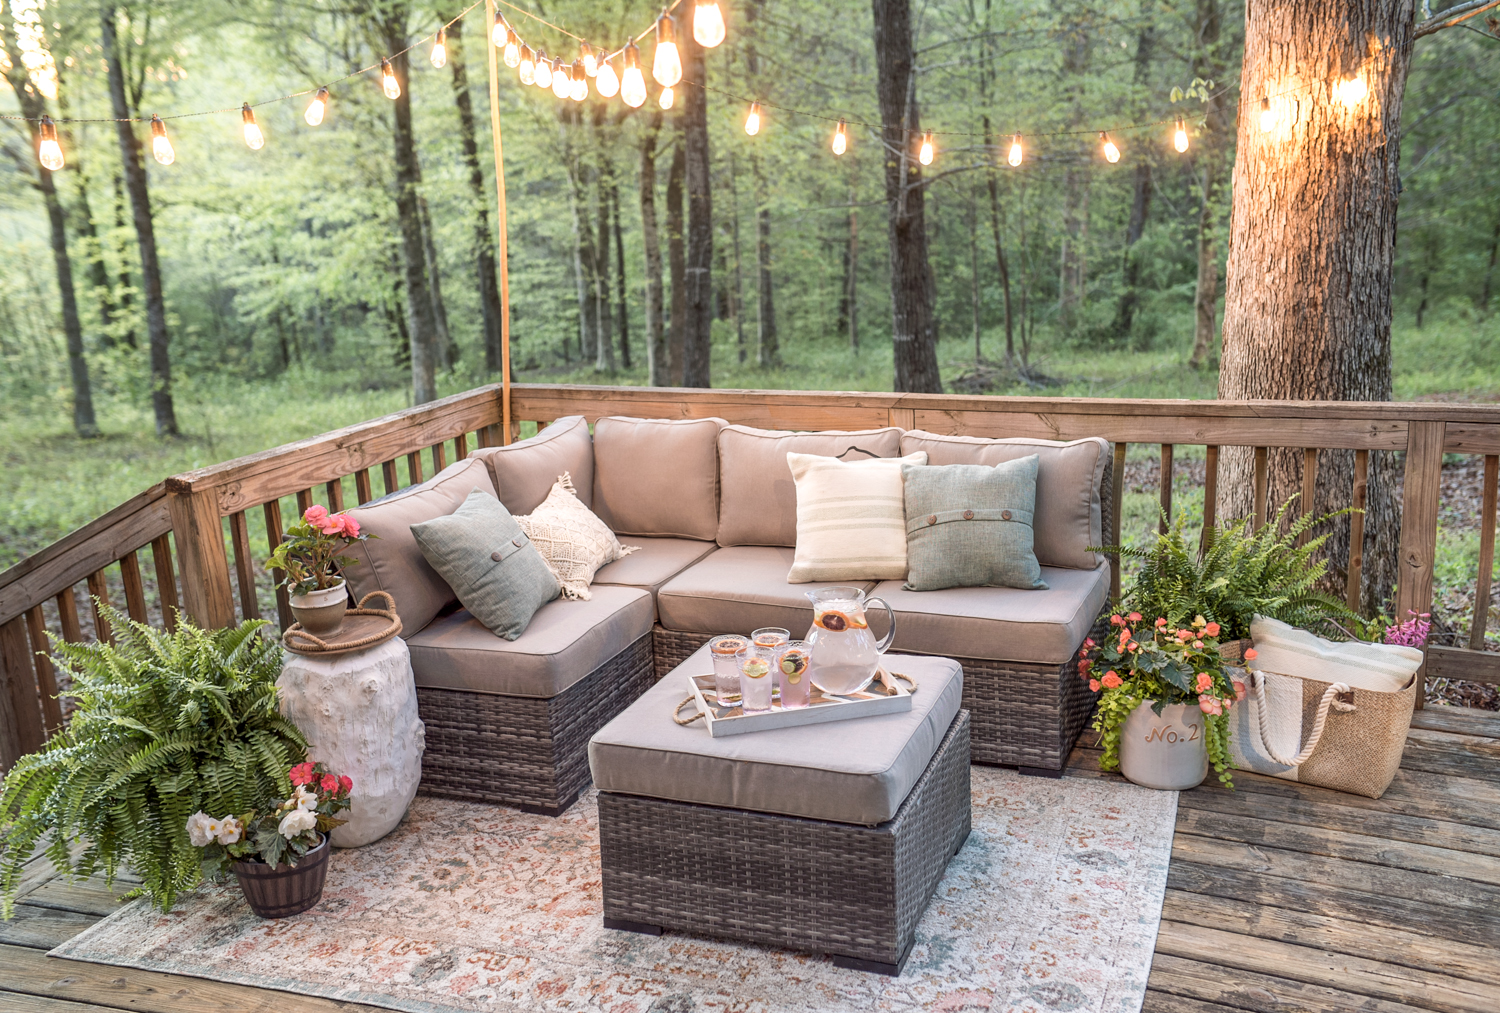 Outdoor Decorating Ideas Tips On How To Decorate Outdoors